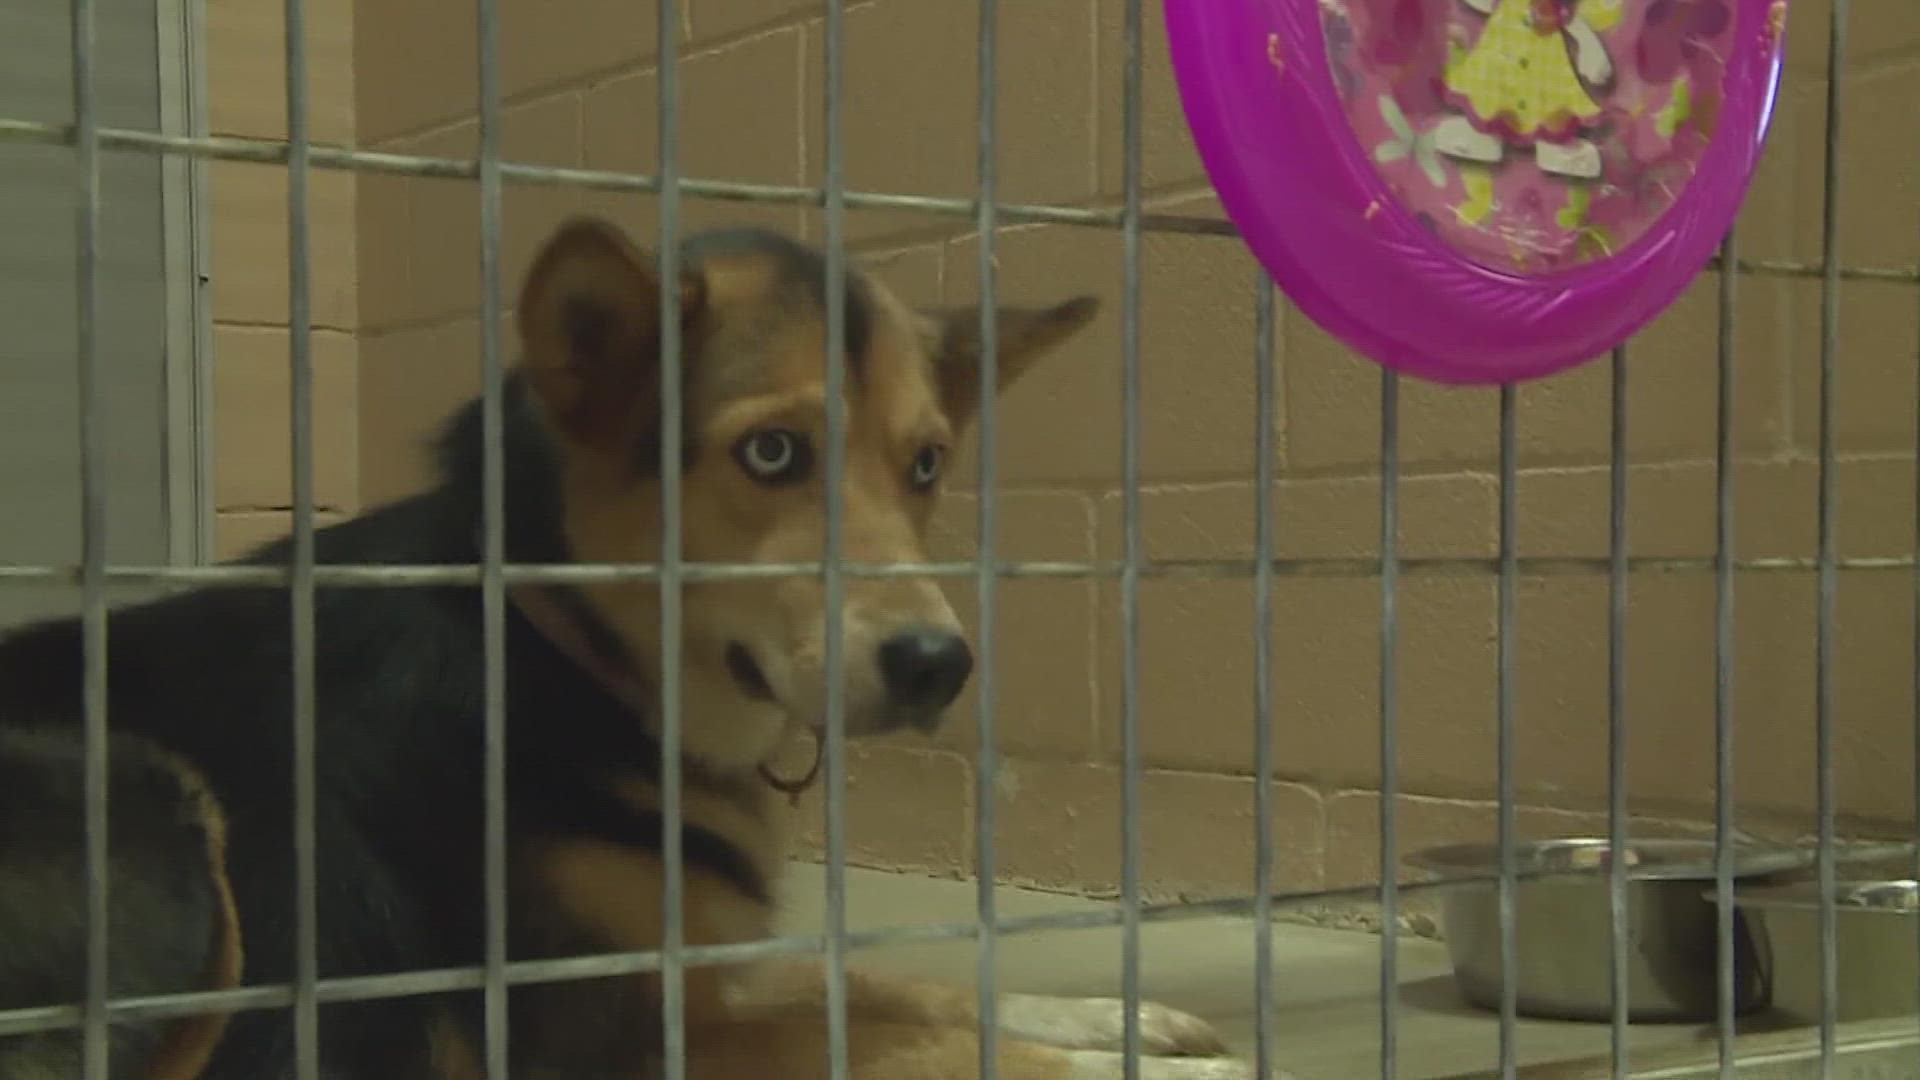 A family fostered and adopted a dog named Stella who otherwise may have been euthanized. Shelters say they need more people to take animals in.